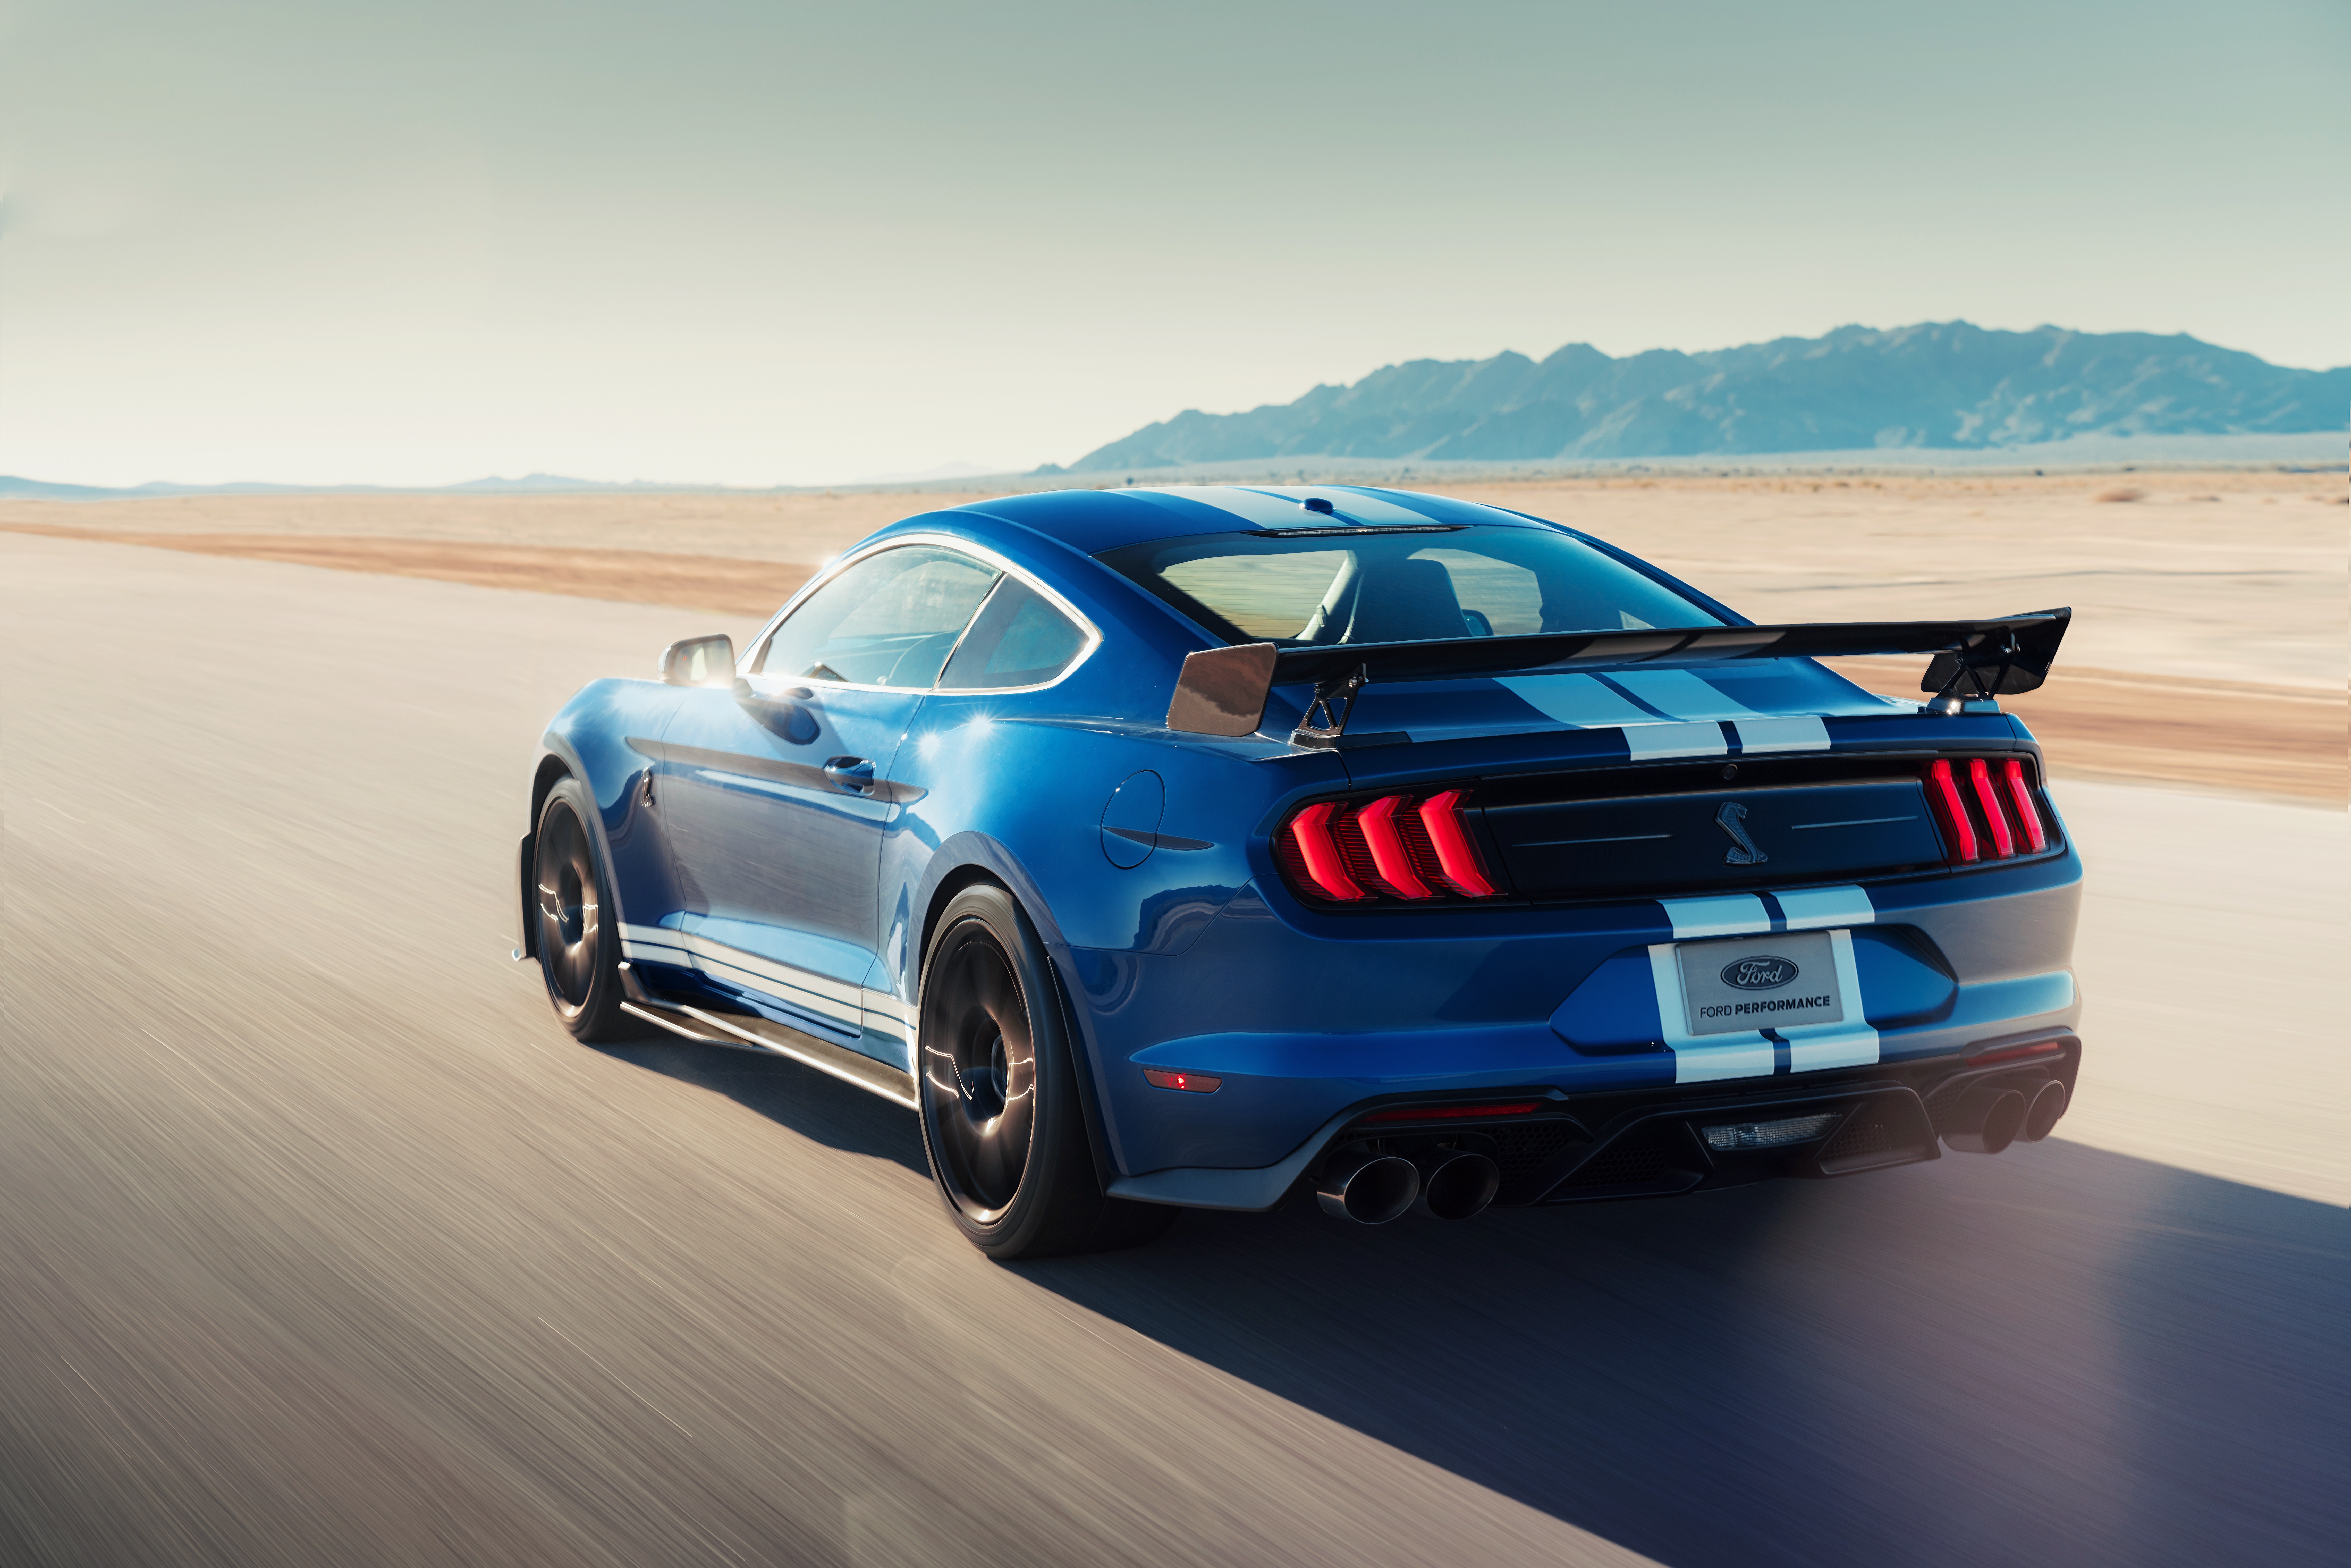 Blue Car Car Ford Ford Mustang Ford Mustang Shelby Ford Mustang Shelby Gt500 Muscle Car 9126x6086